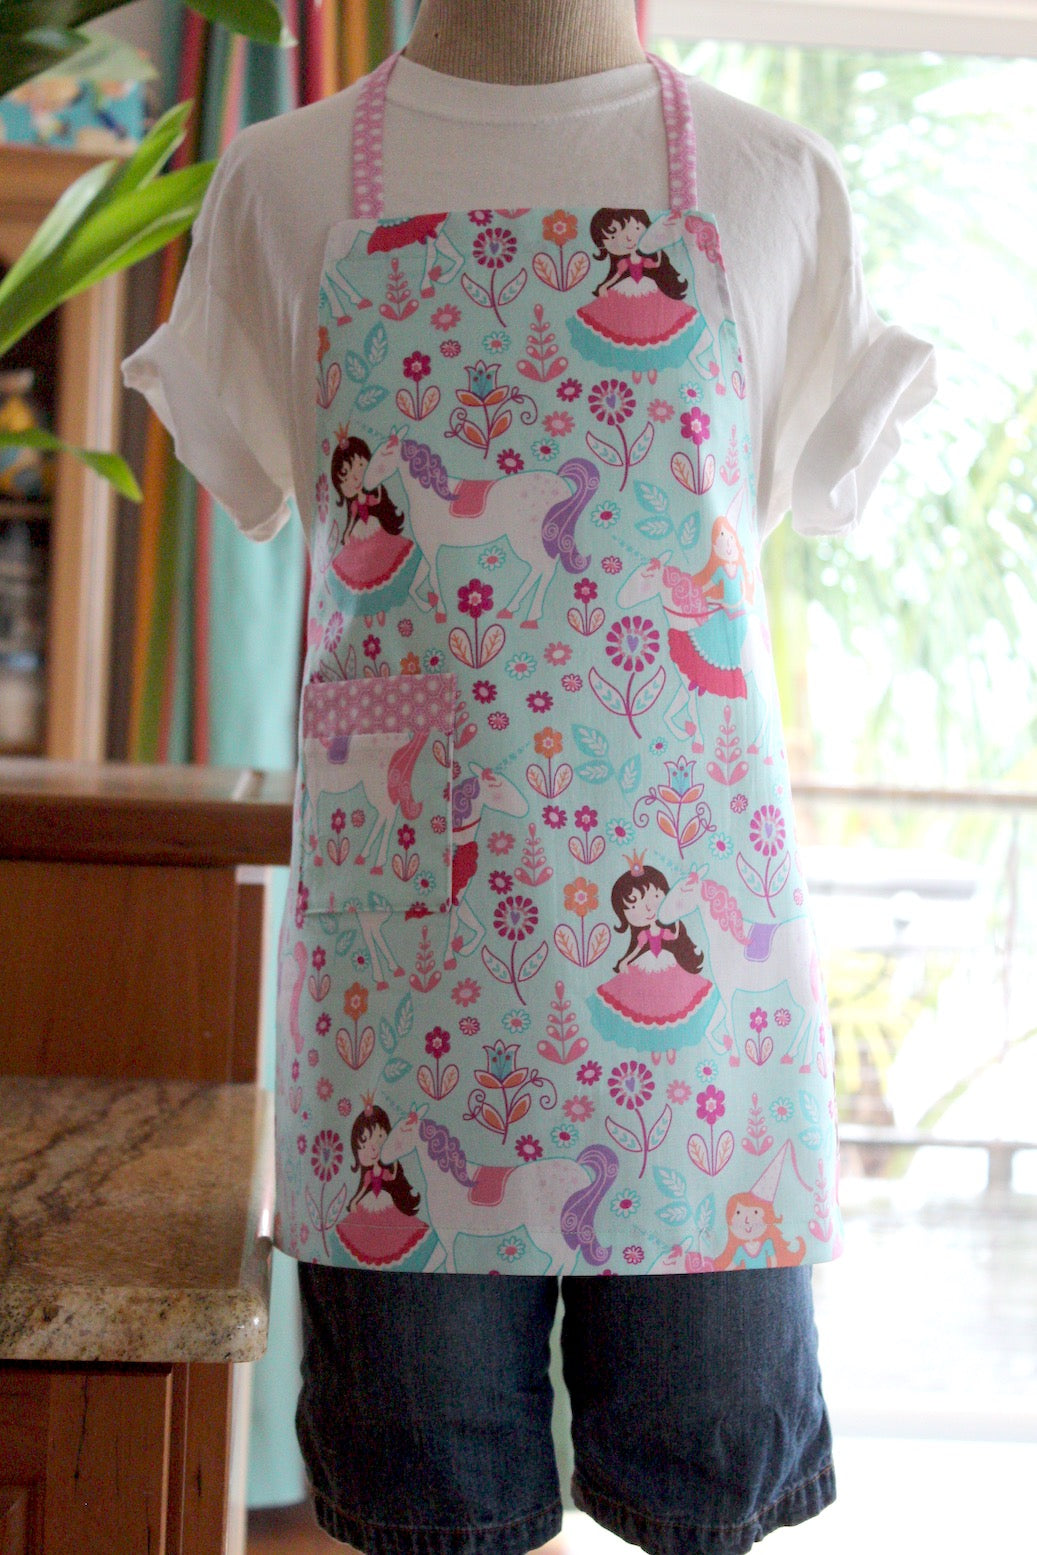 Princesses and Unicorns Kid's Apron-The Blue Peony-Age Group_Kids,Category_Apron,Color_Aqua,Color_Pink,Department_Kitchen,Gender_Girls,Material_Cotton,Size_Medium (ages 6-11),Size_Small (ages up to 5),Theme_Animal